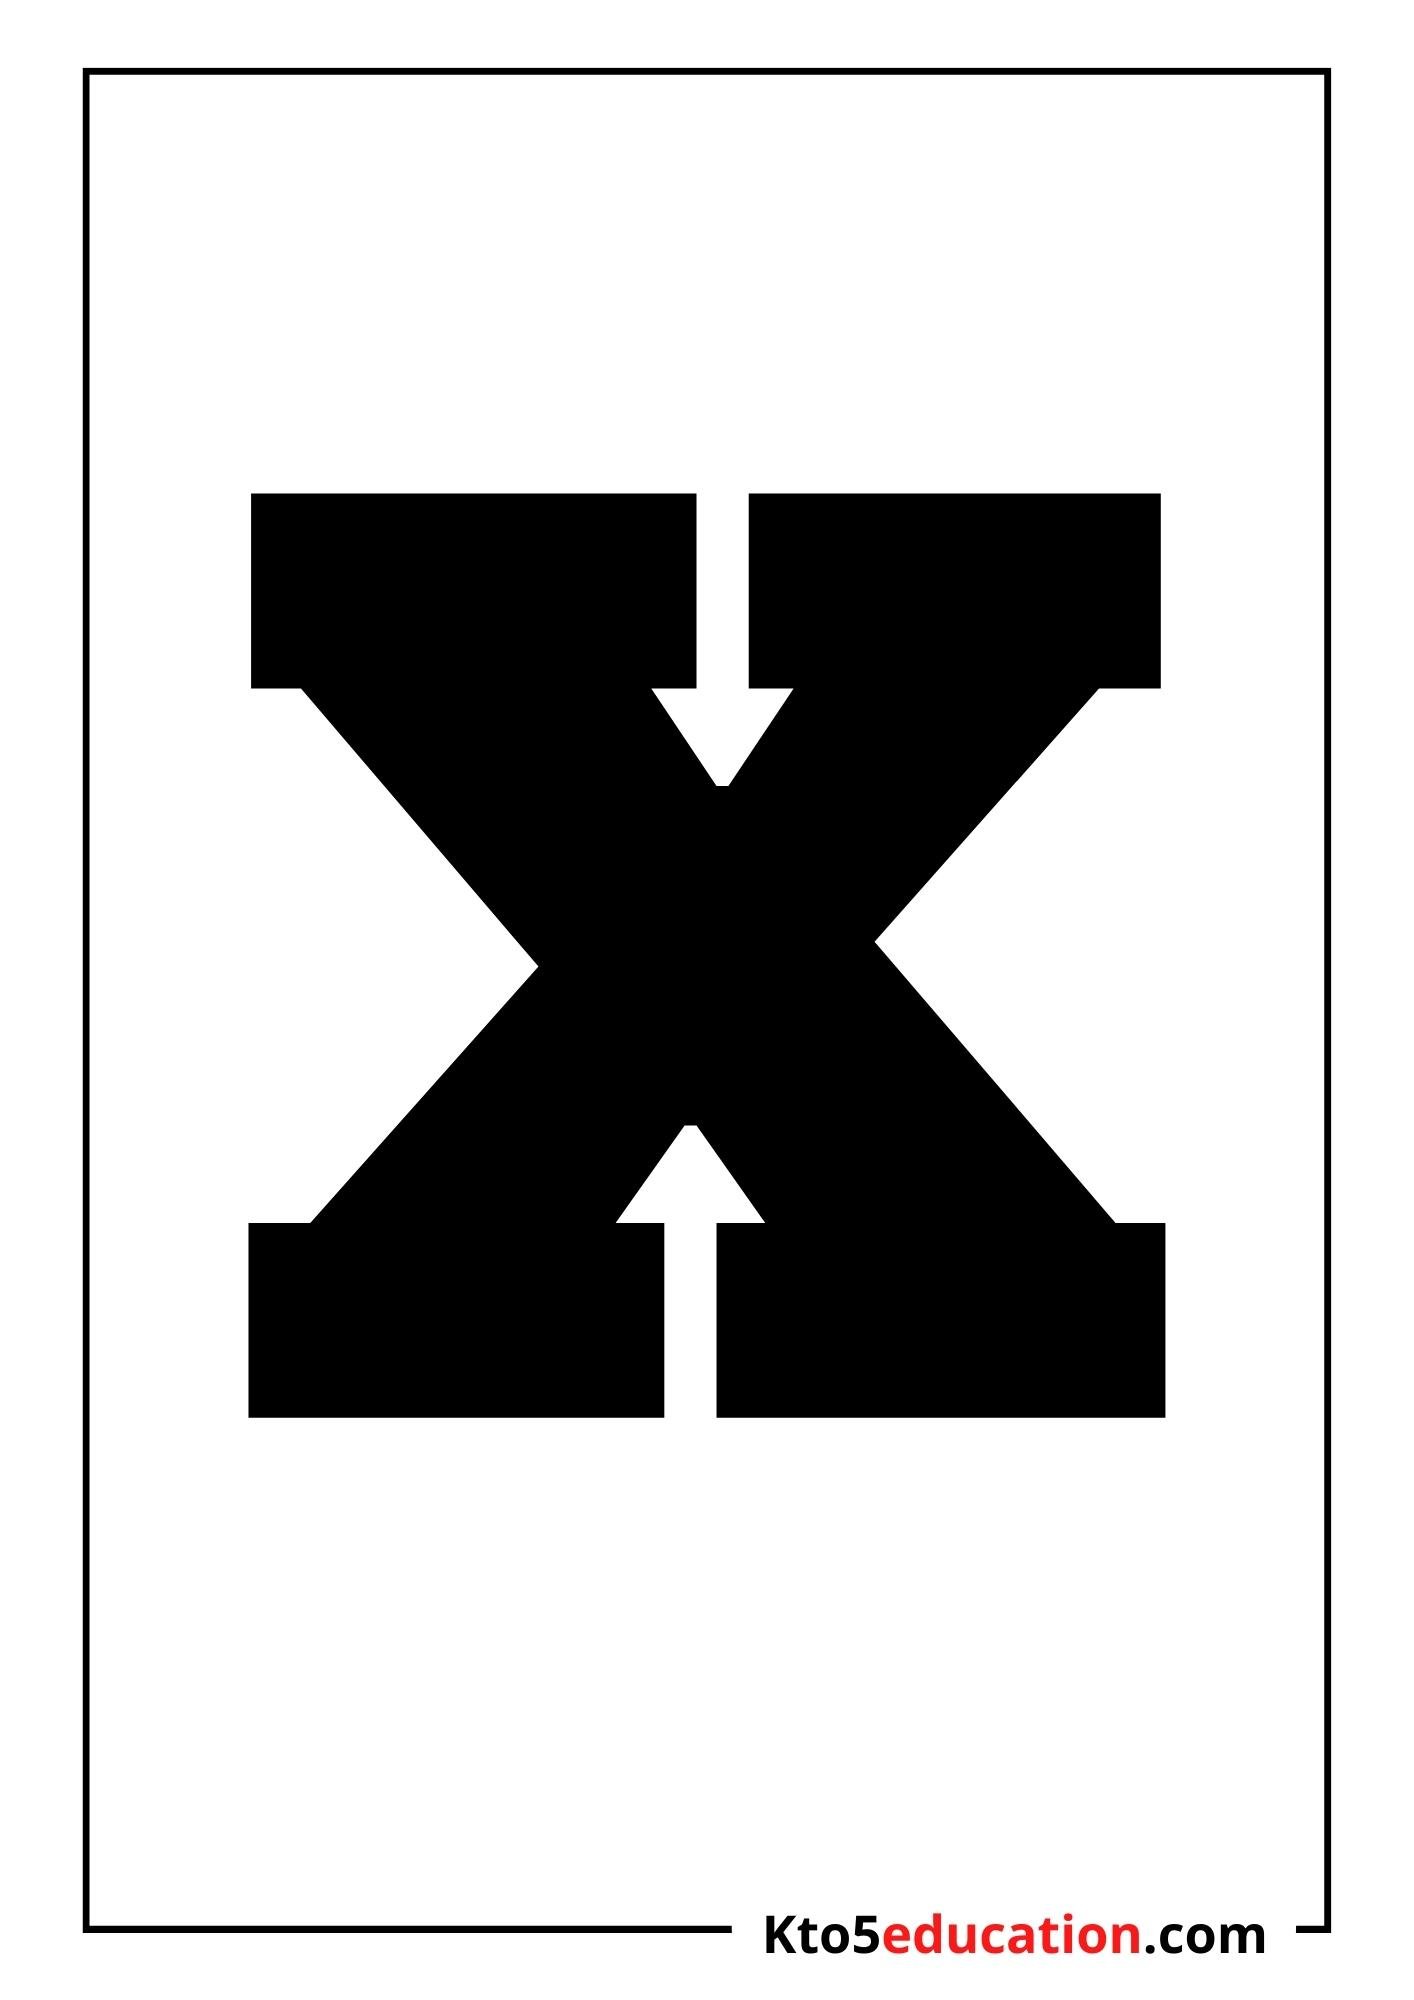 Free Printable Letter X Silhouette